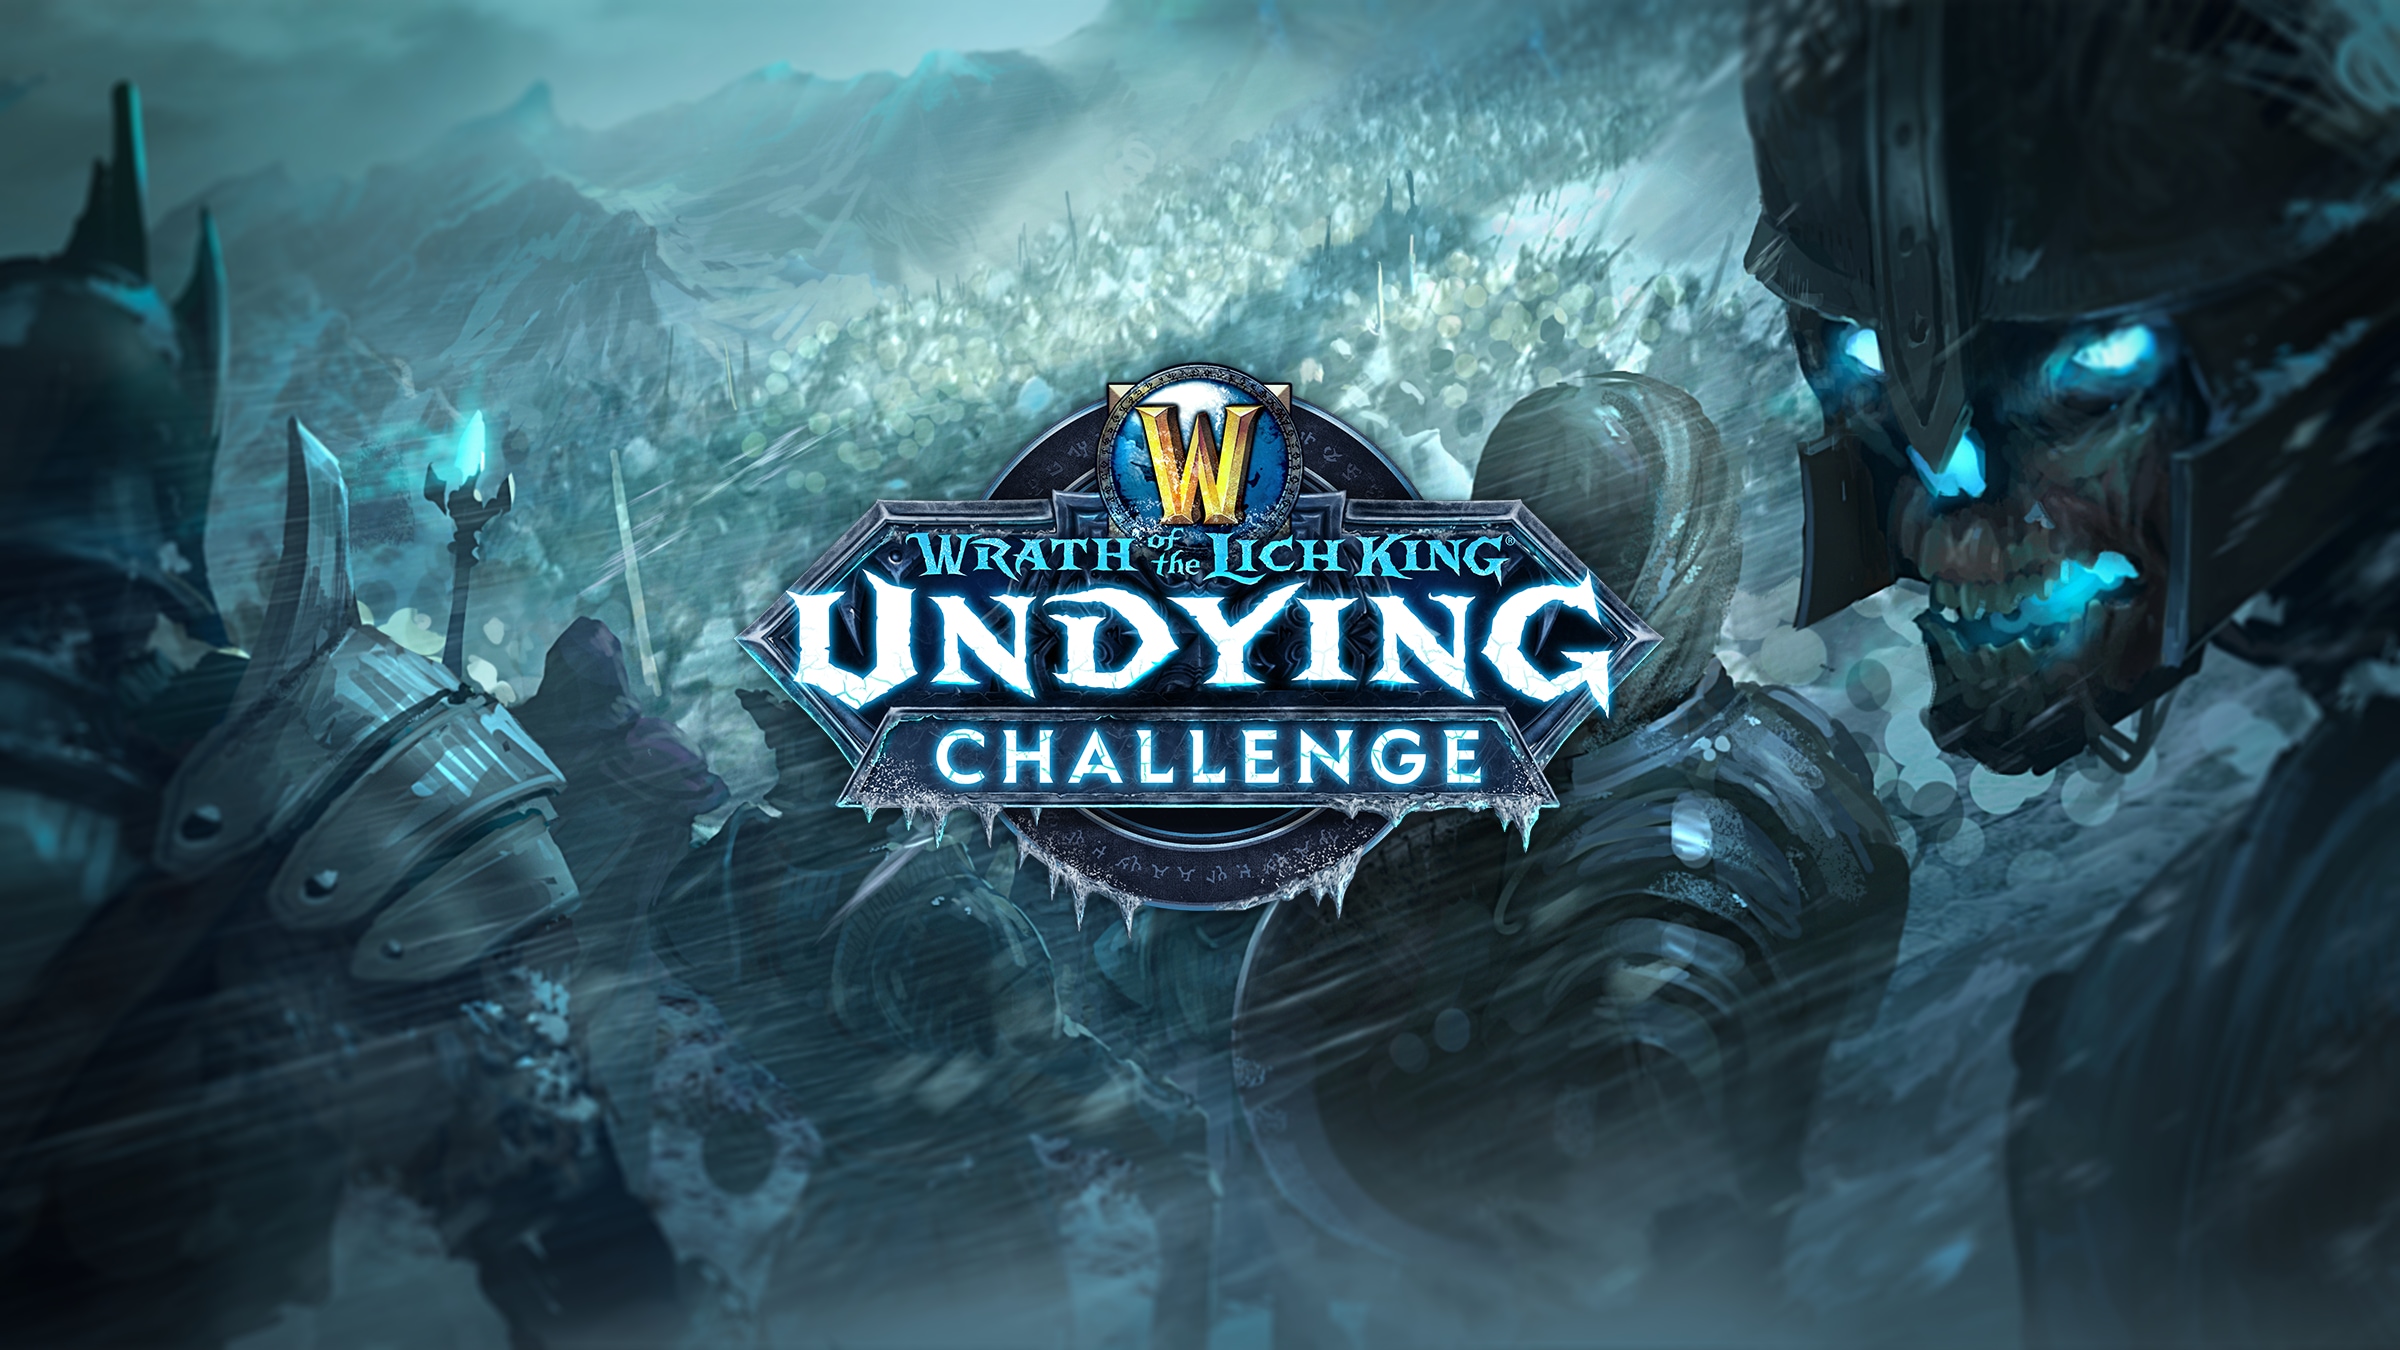 The Undying Challenge Viewers Guide